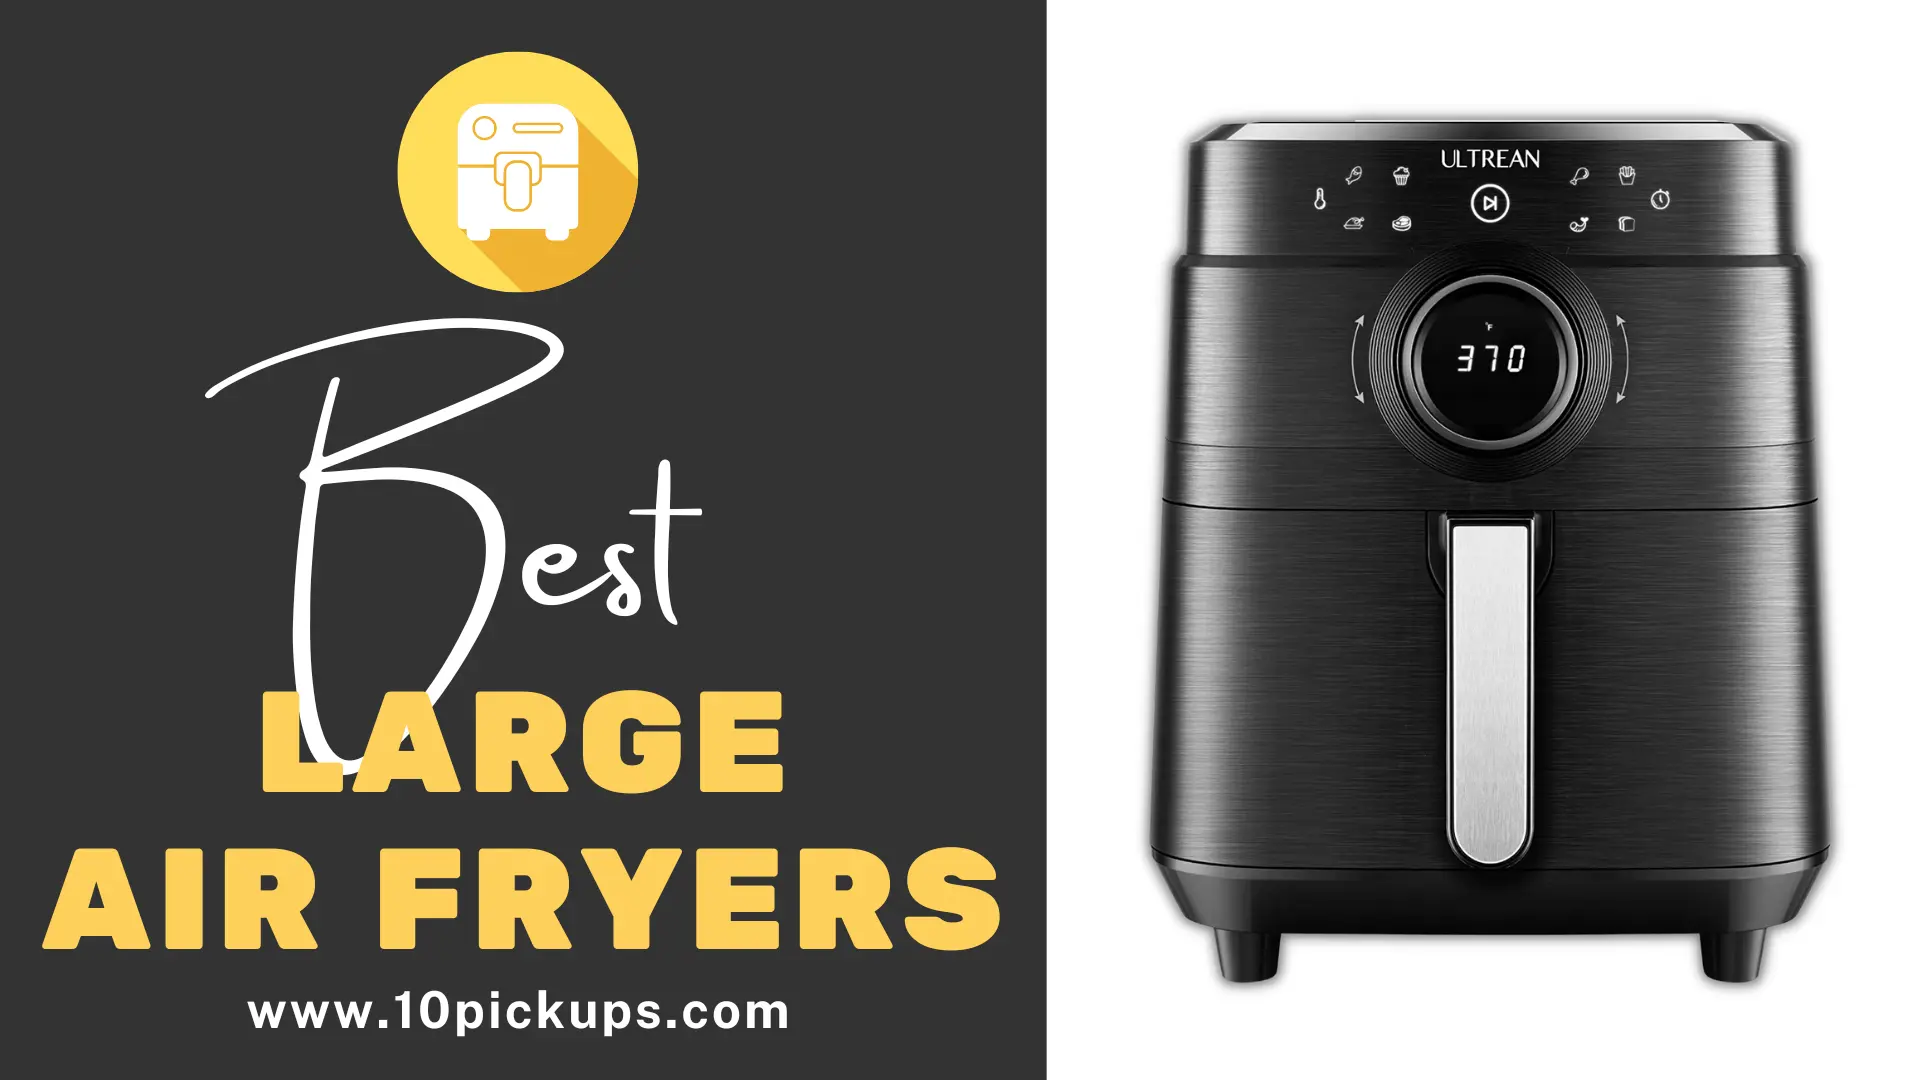 10 Best Large Air Fryers for Large Family in 2022 According to Kitchen Expert